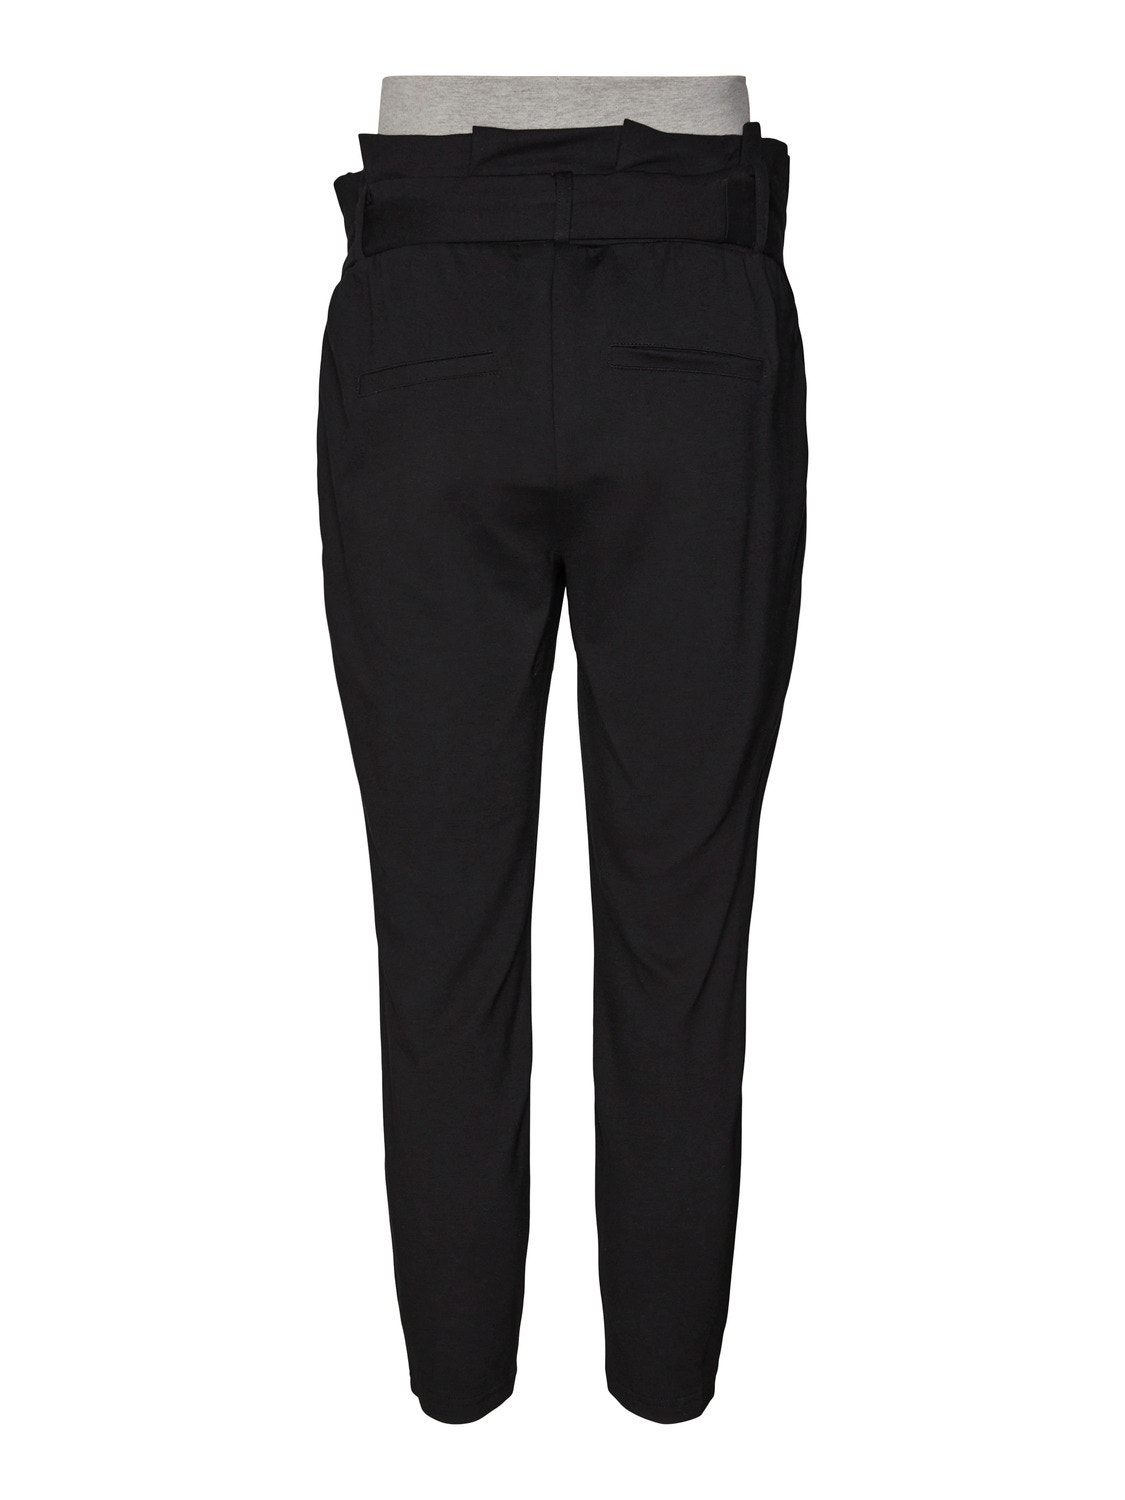 MAMA.LICIOUS Loose Fit Trousers -Black - 20018194